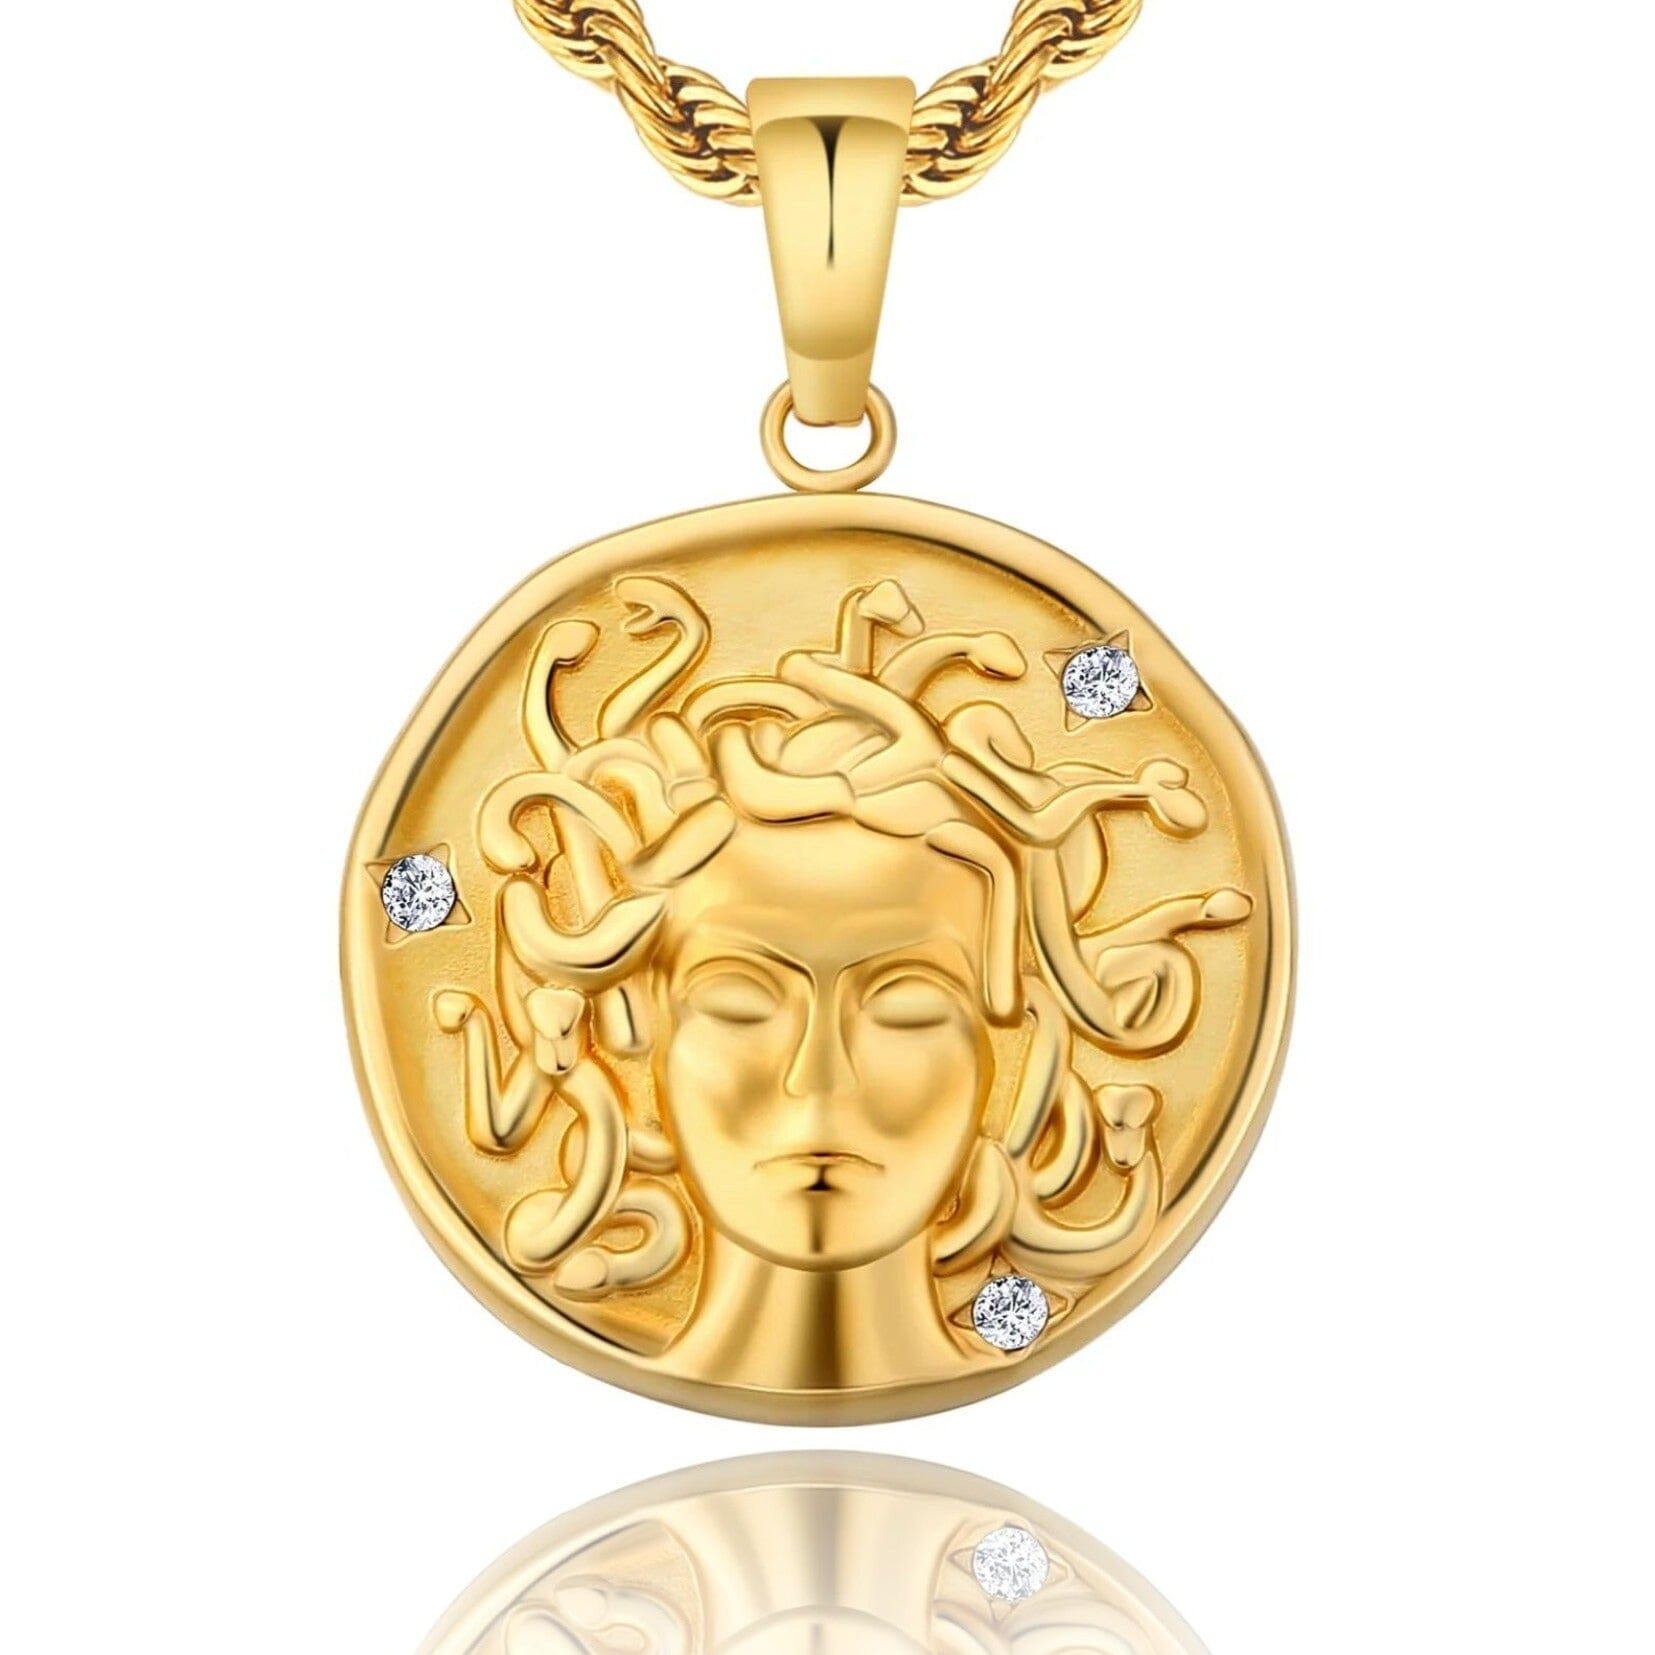 Medusa Head Coin Pendant Necklace 18K Gold Free Rope Chain 